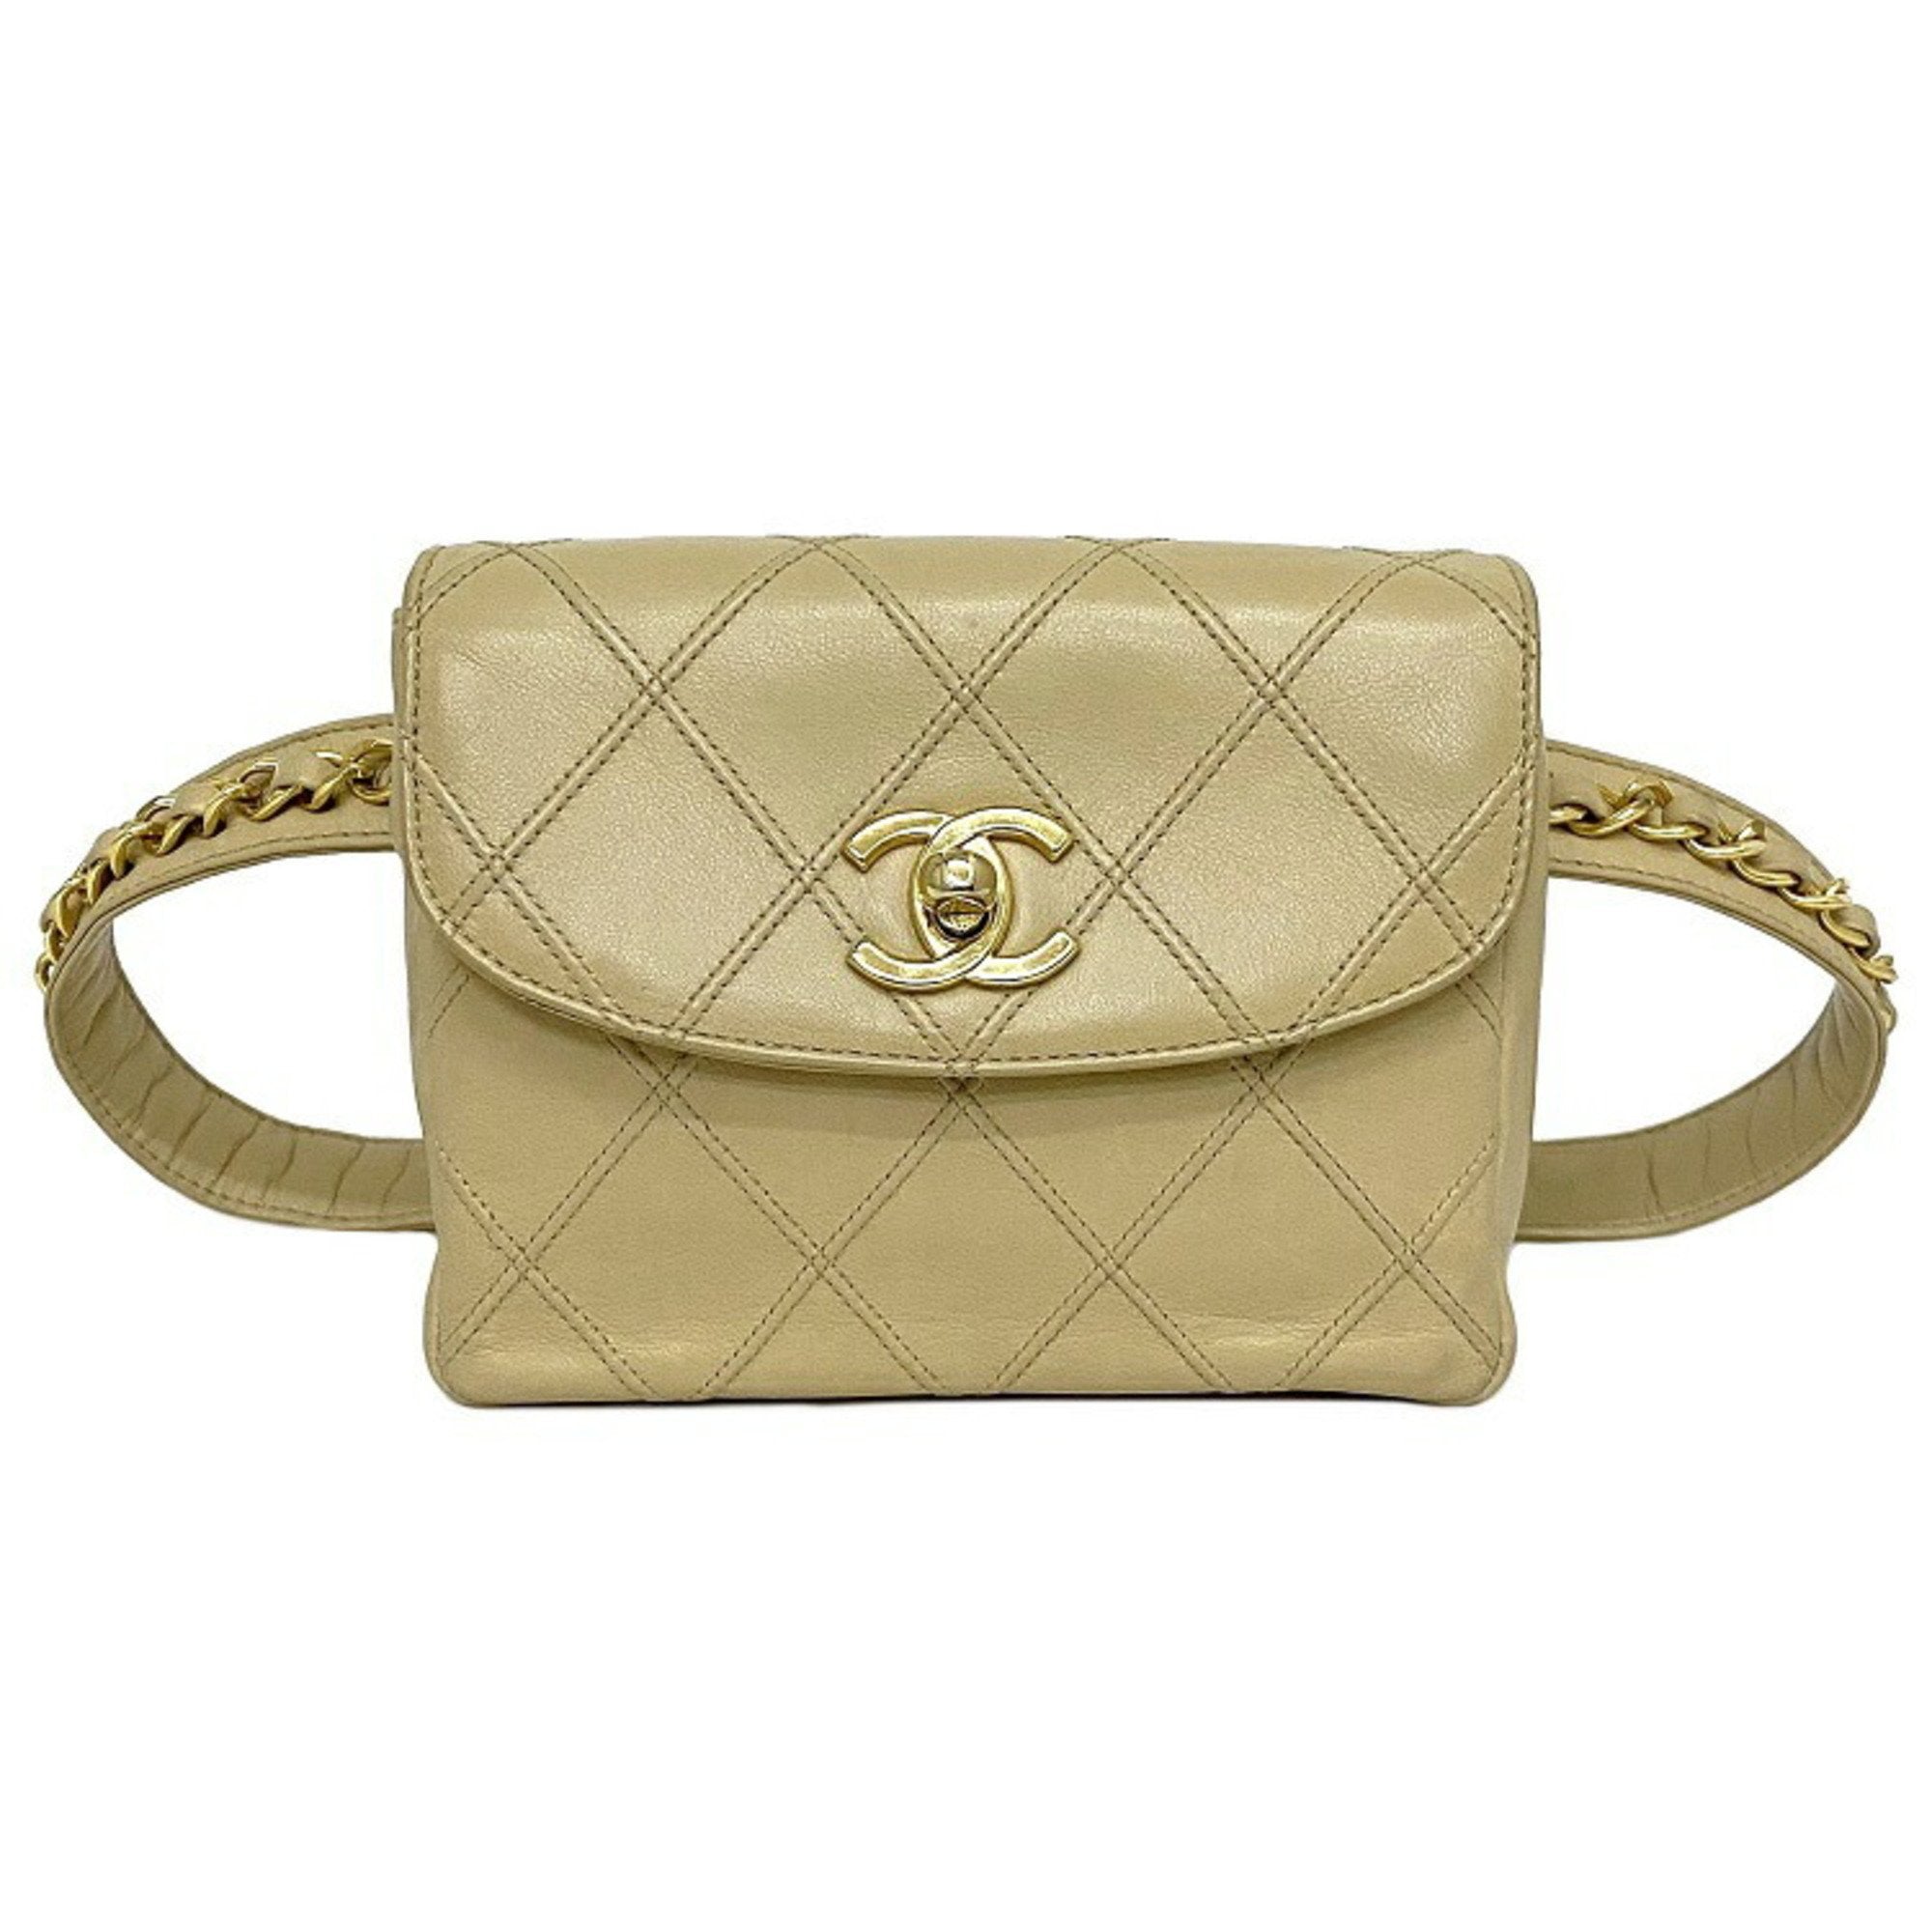 Chanel Waist Bag Beige Gold Bicolore Cosmos Line Leather Lambskin CHAN